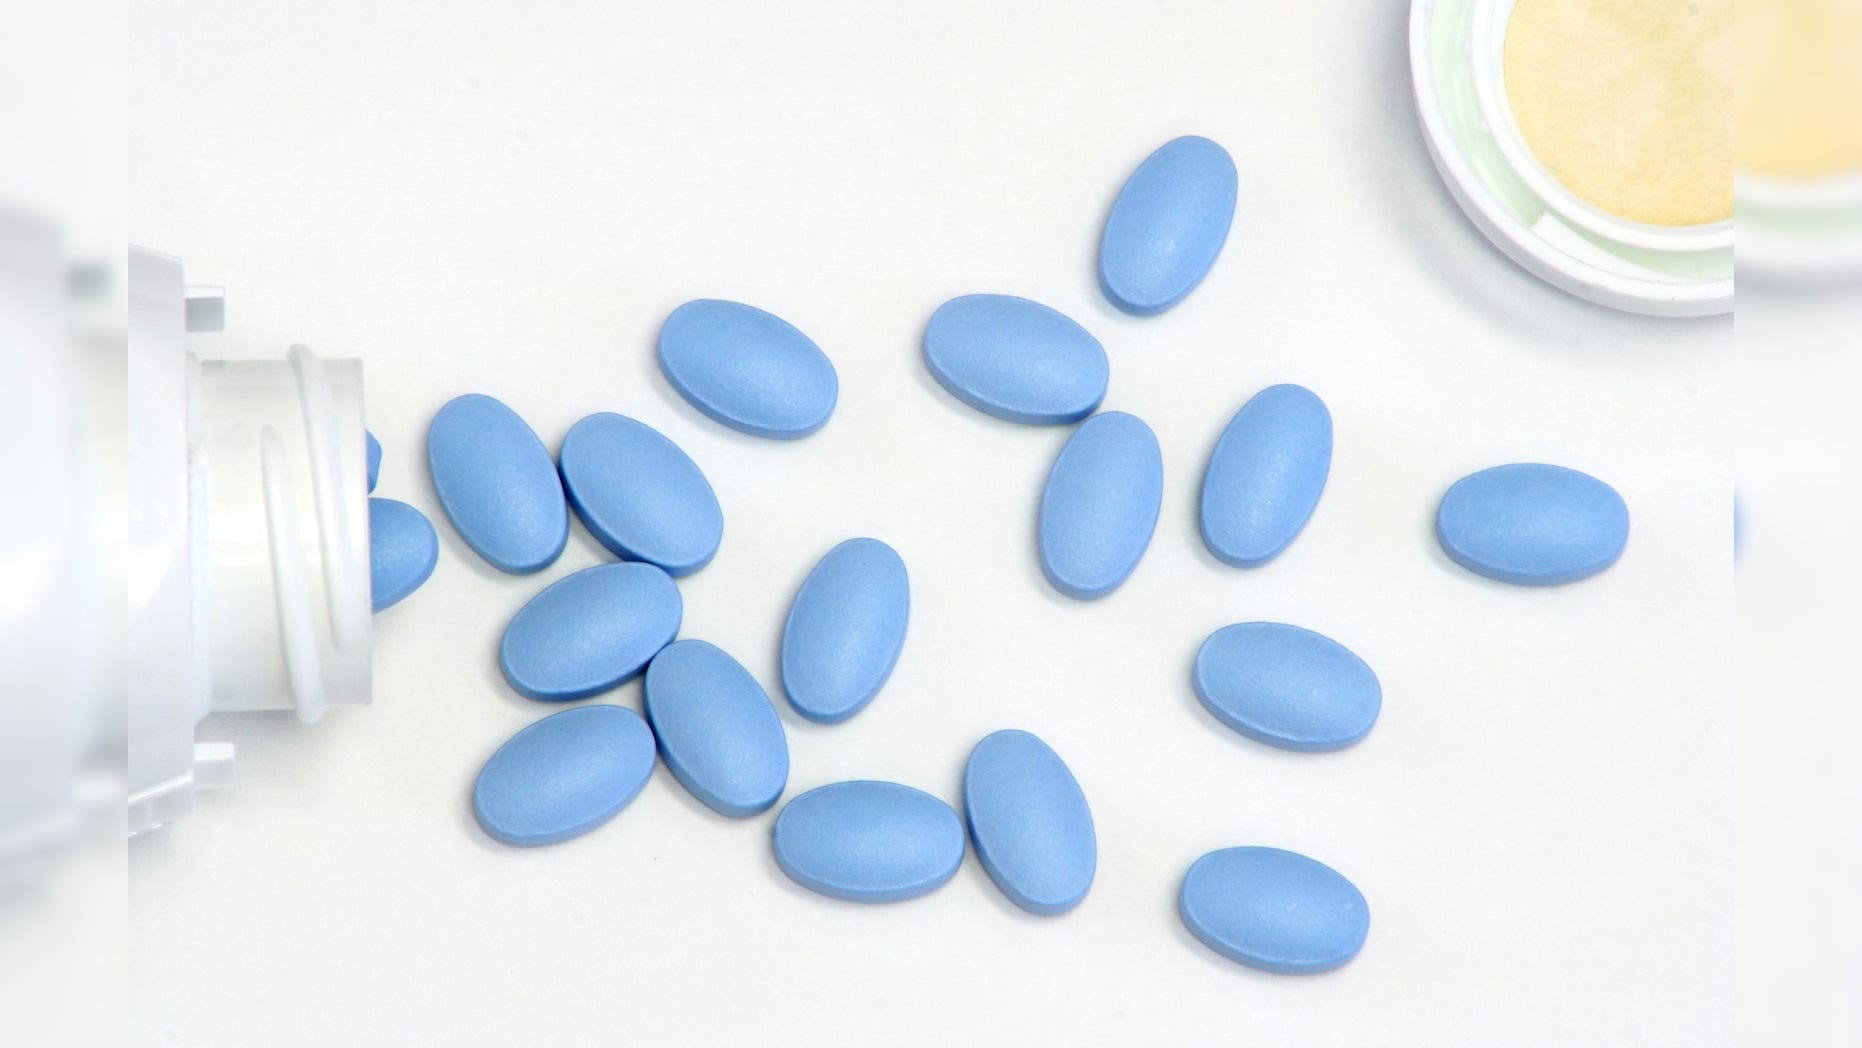 Viagra can help men with coronary arteries live longer, the study suggests